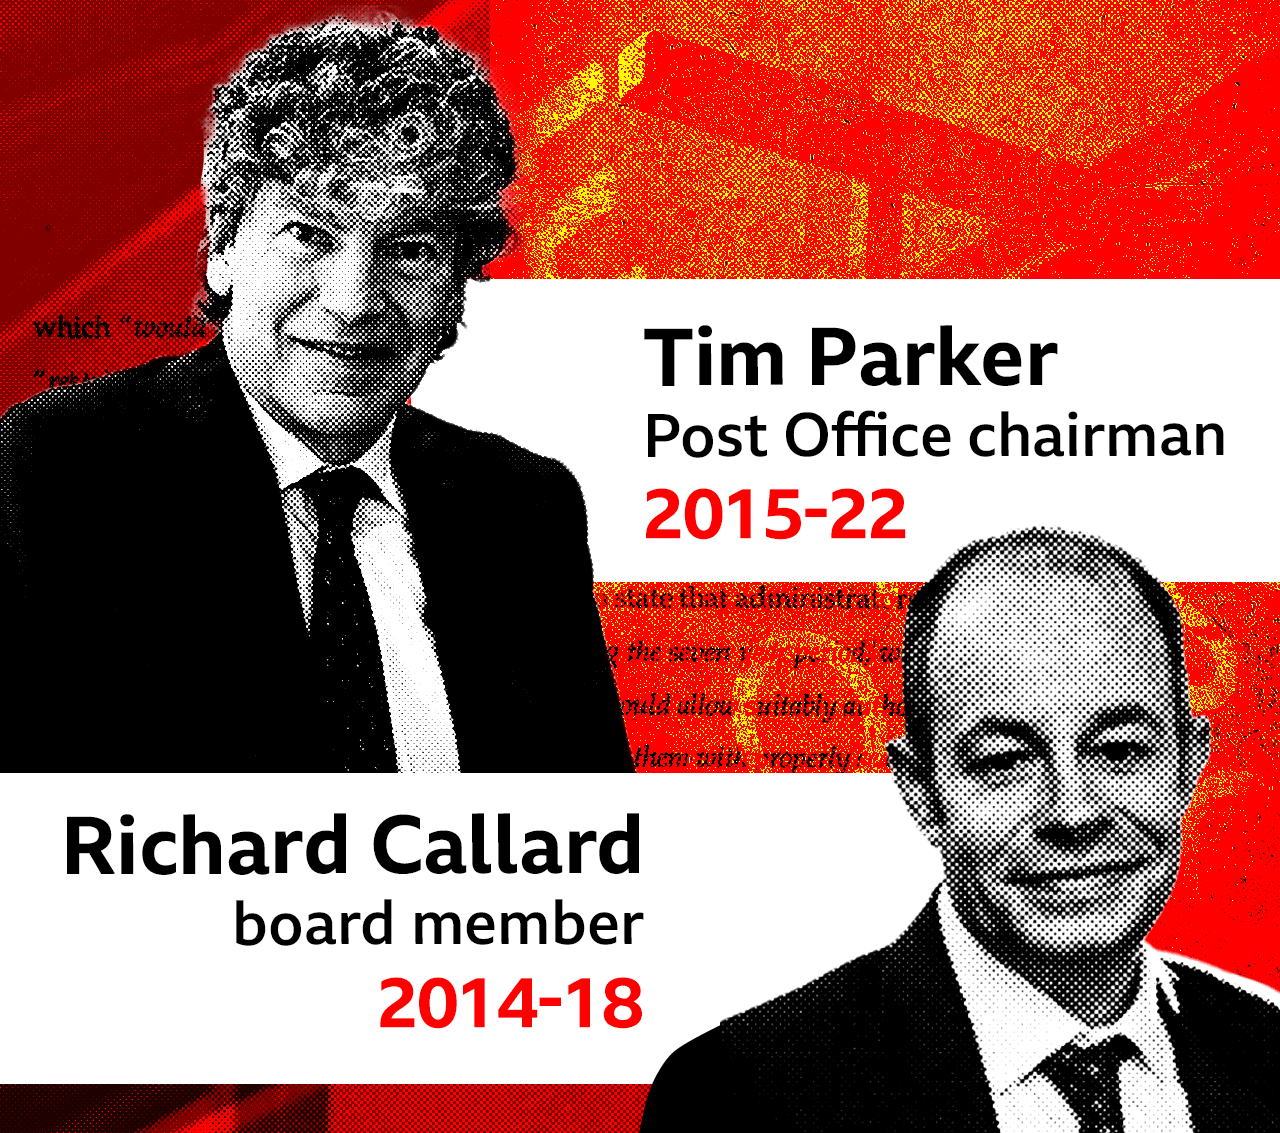 Graphic showing members of the Post Office board and the dates they served: Tim Parker, chairman (2015-22), Richard Callard, representing the government on the board (2014-18)